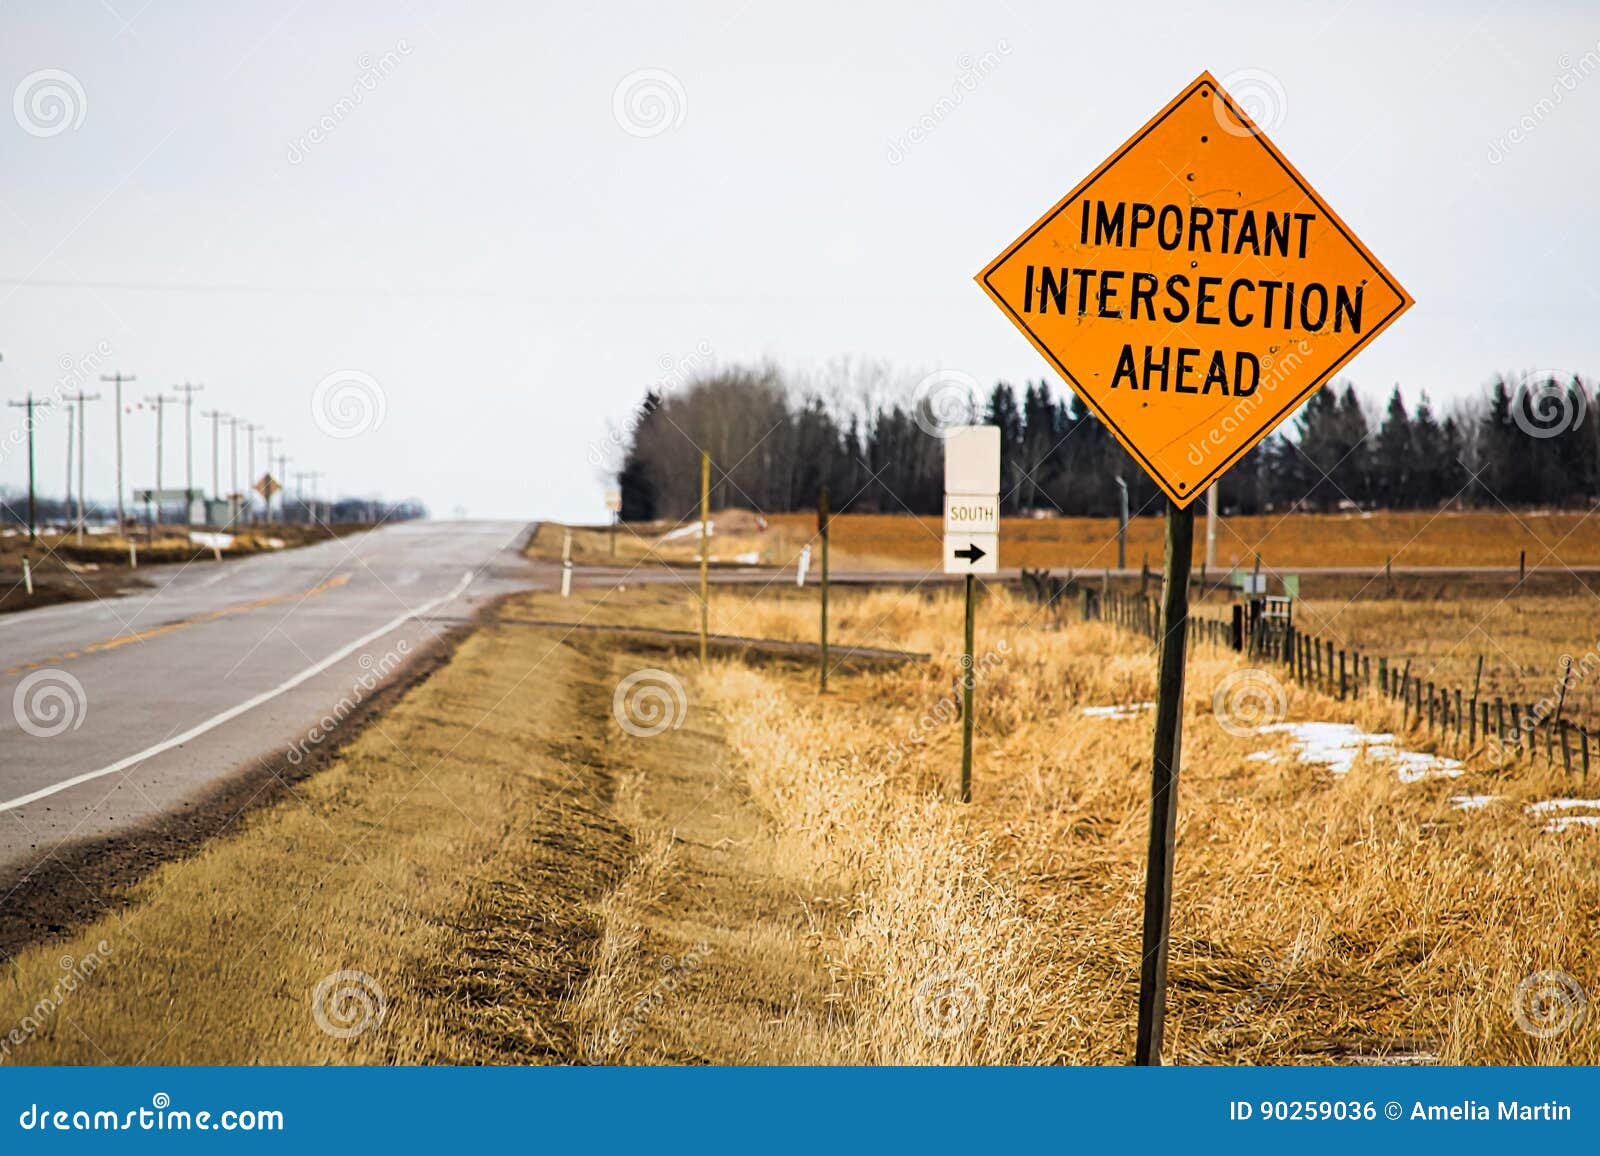 important intersection ahead sign